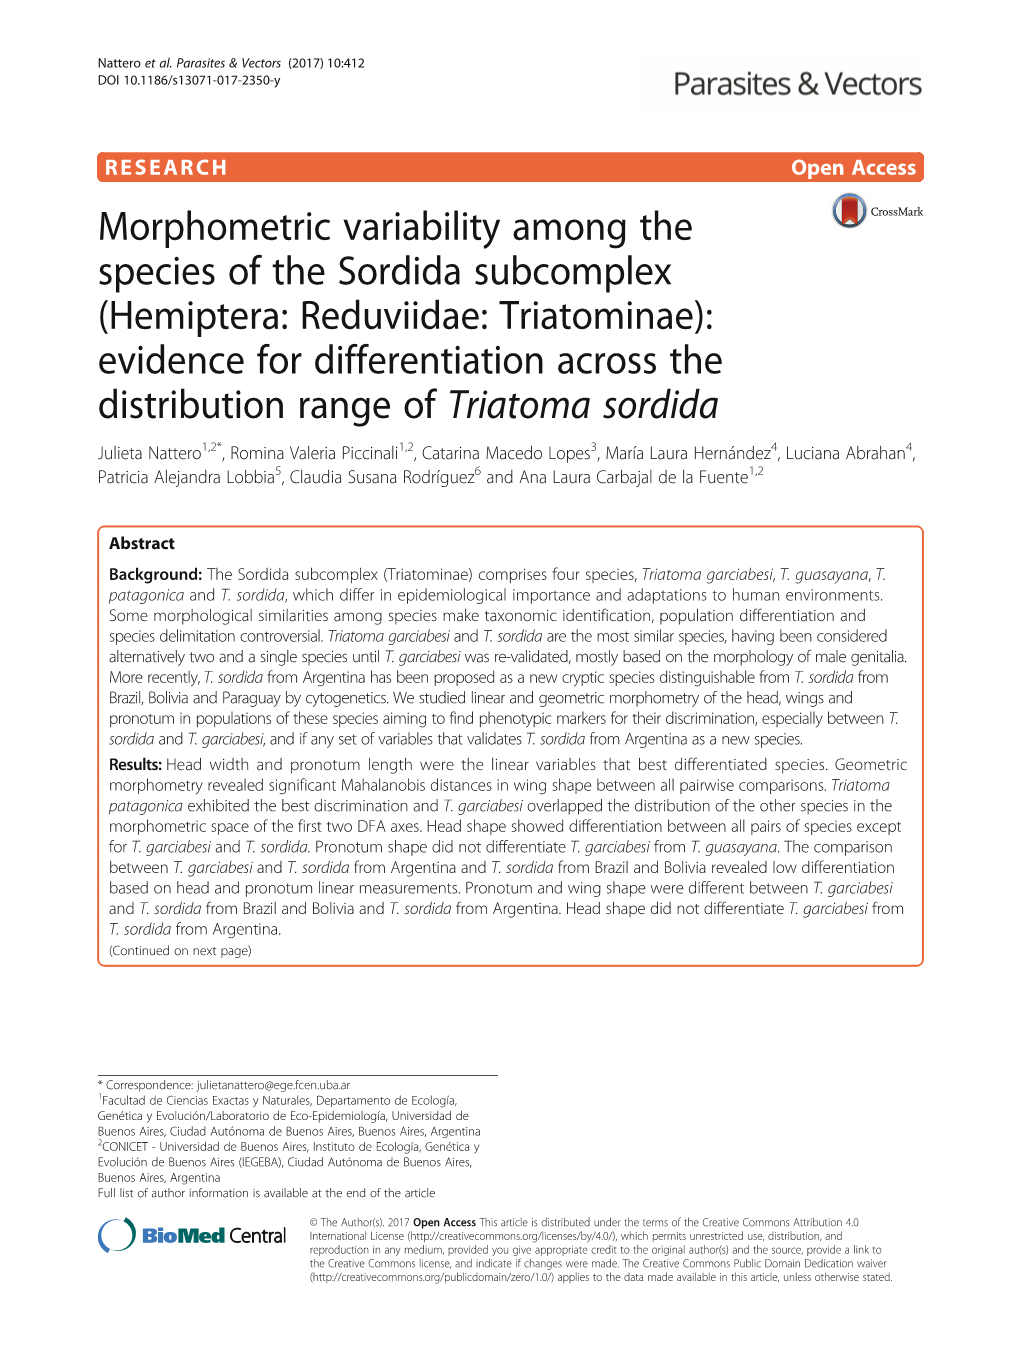 Morphometric Variability Among the Species of the Sordida Subcomplex (Hemiptera: Reduviidae: Triatominae): Evidence for Differen